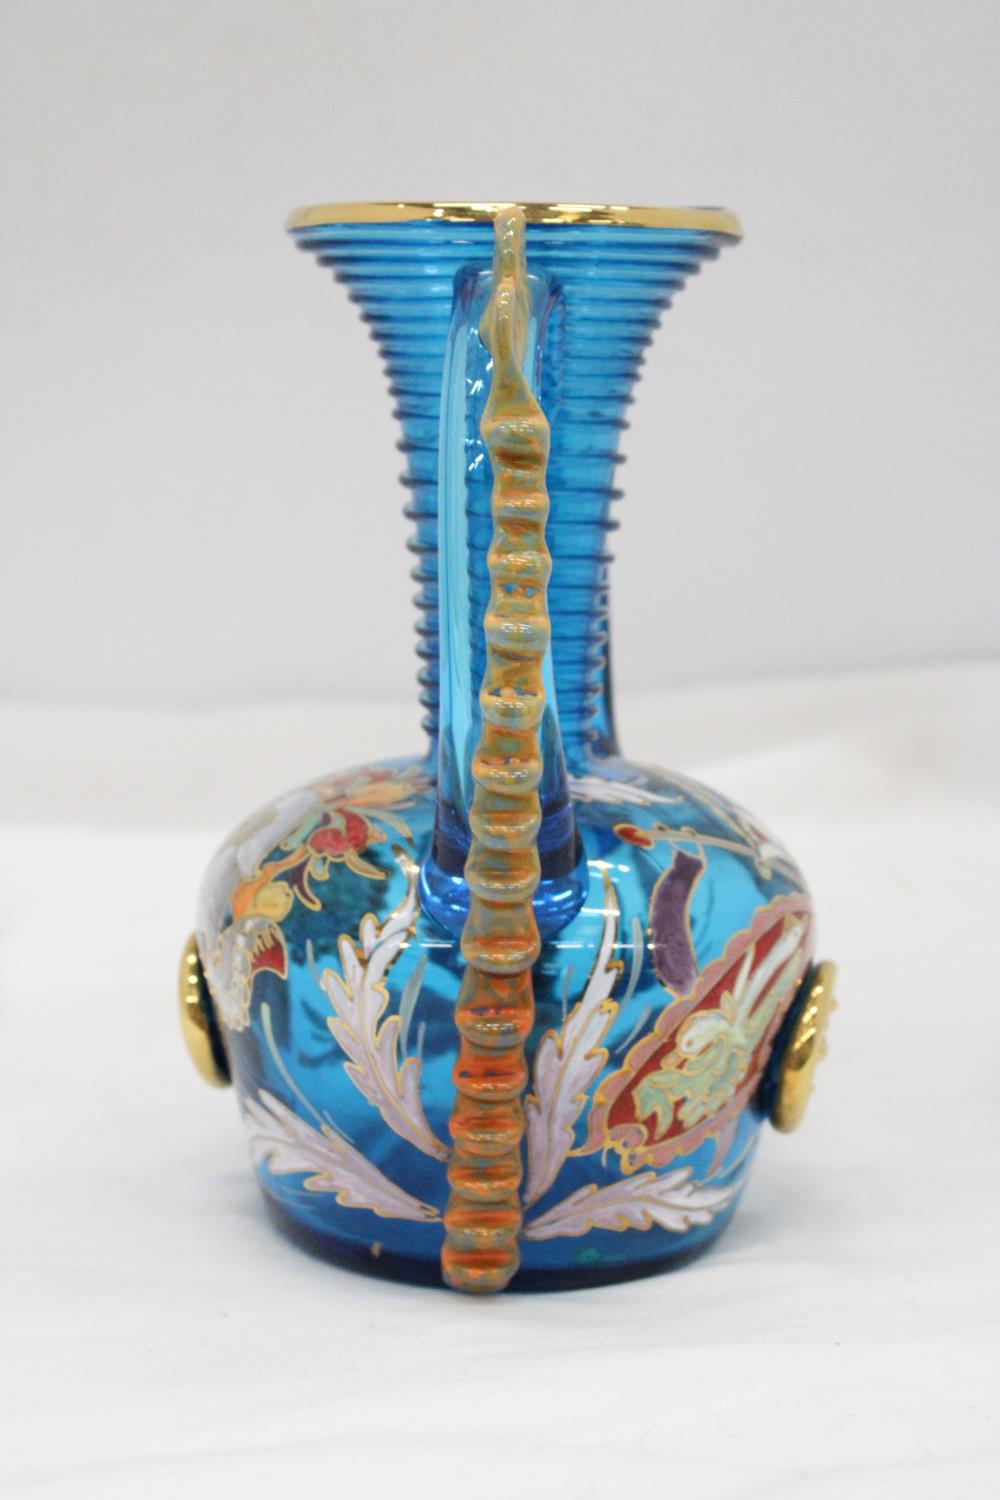 A 1960'S/70'S, LARGE ROYO GLASS VASE WITH GILDED ENAMEL DECORATION, HEIGHT 20CM - Image 3 of 6